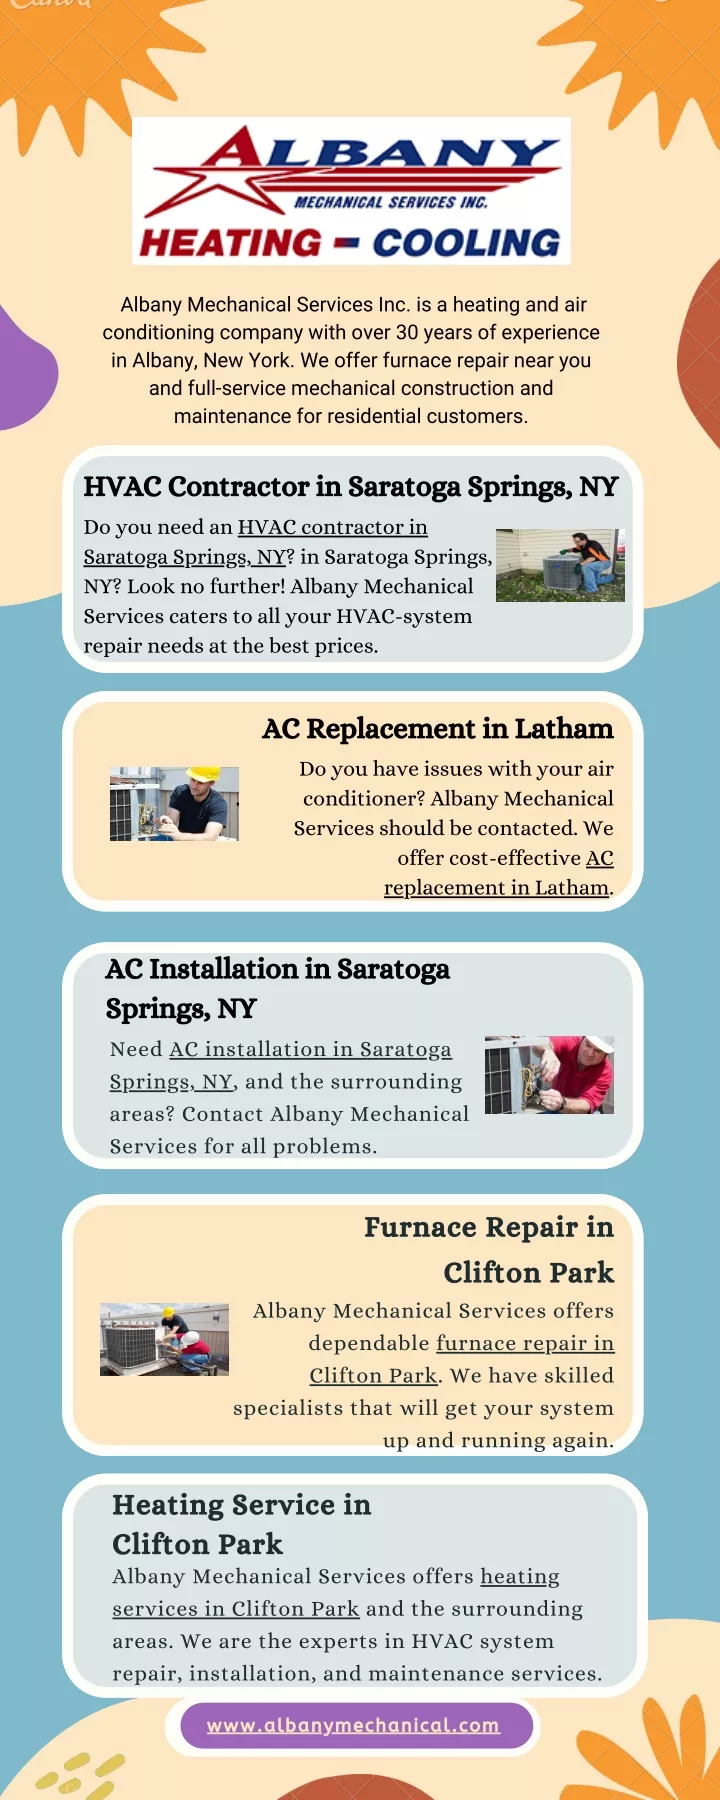 albany mechanical services inc is a heating